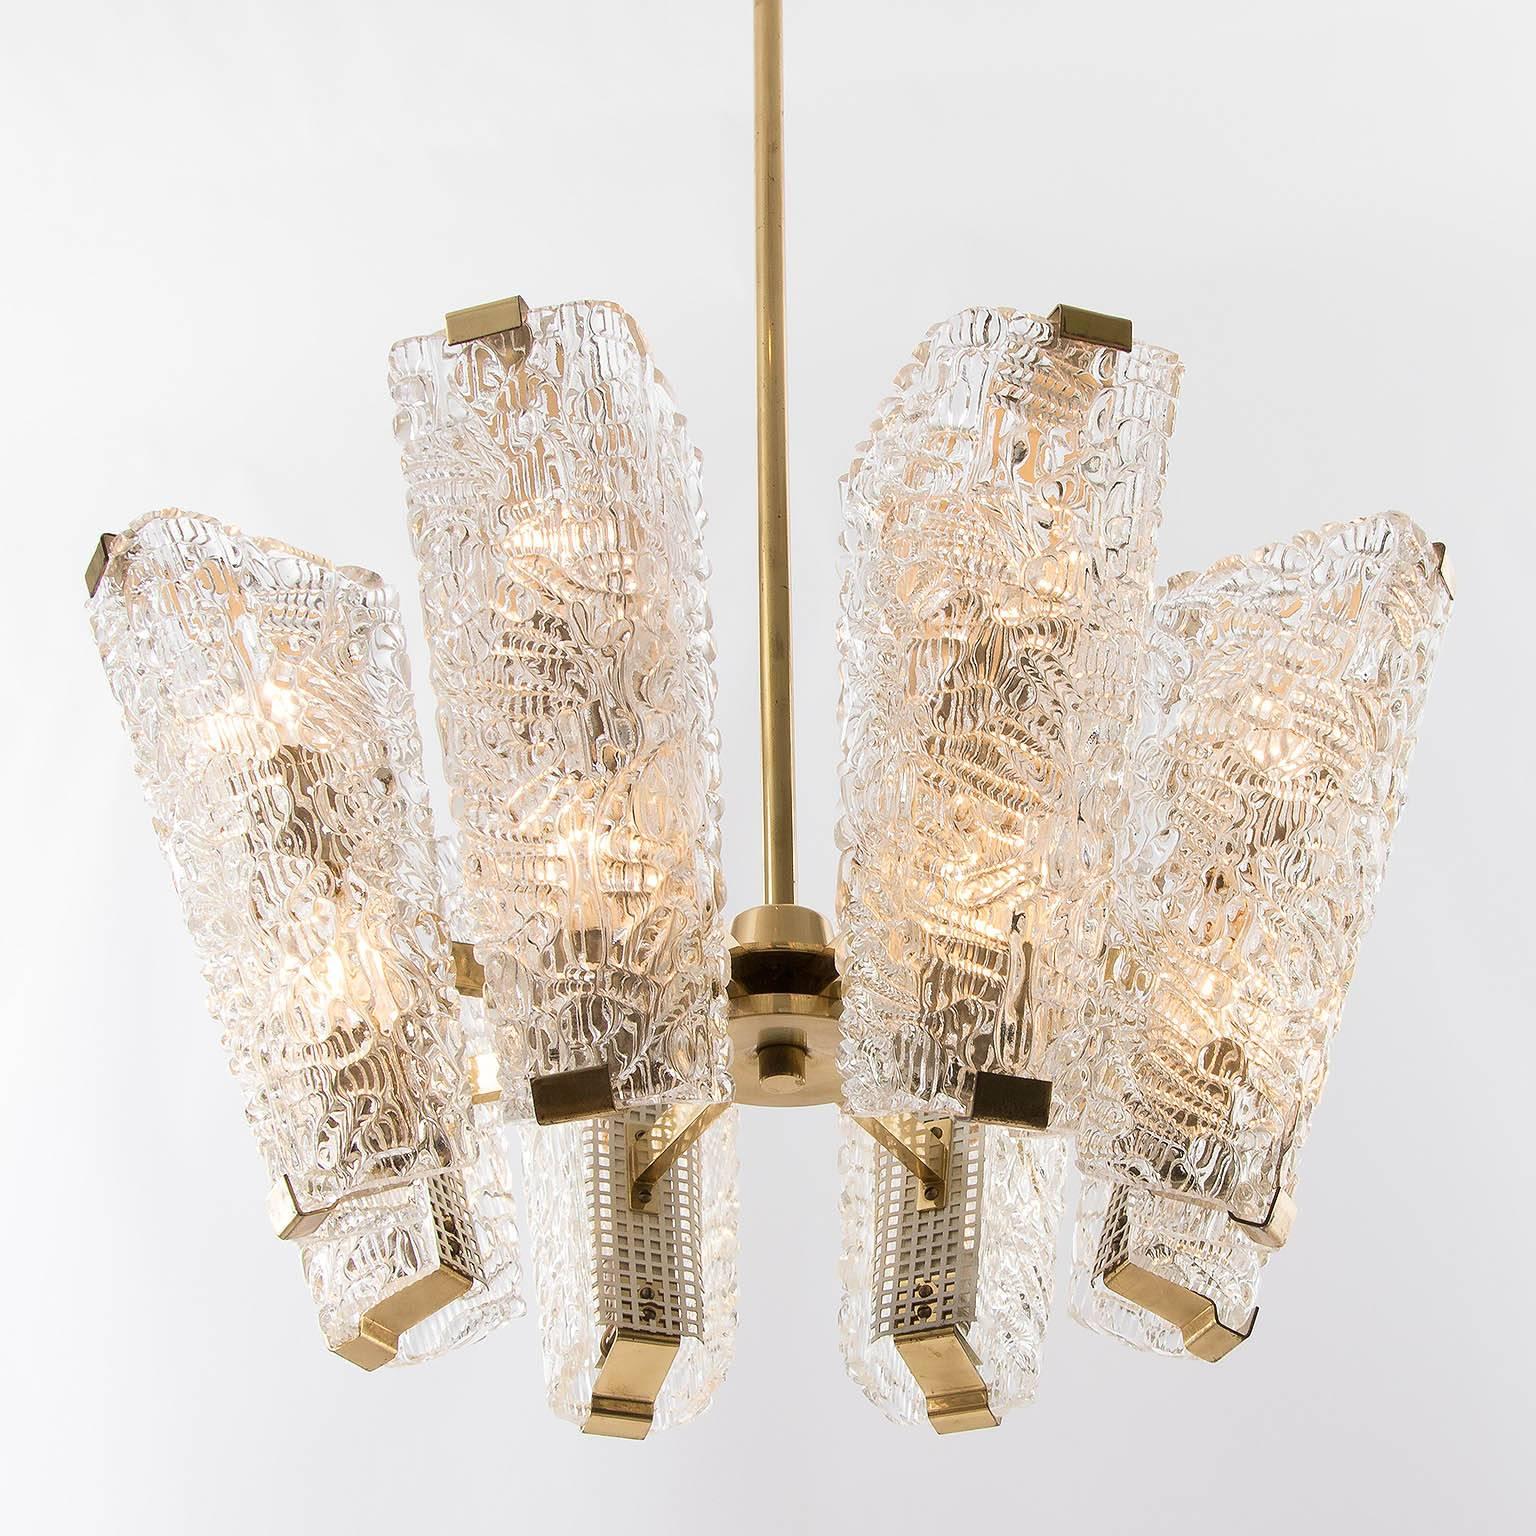 Large Kalmar Chandelier, Brass and Textured Glass, 1950s For Sale 3